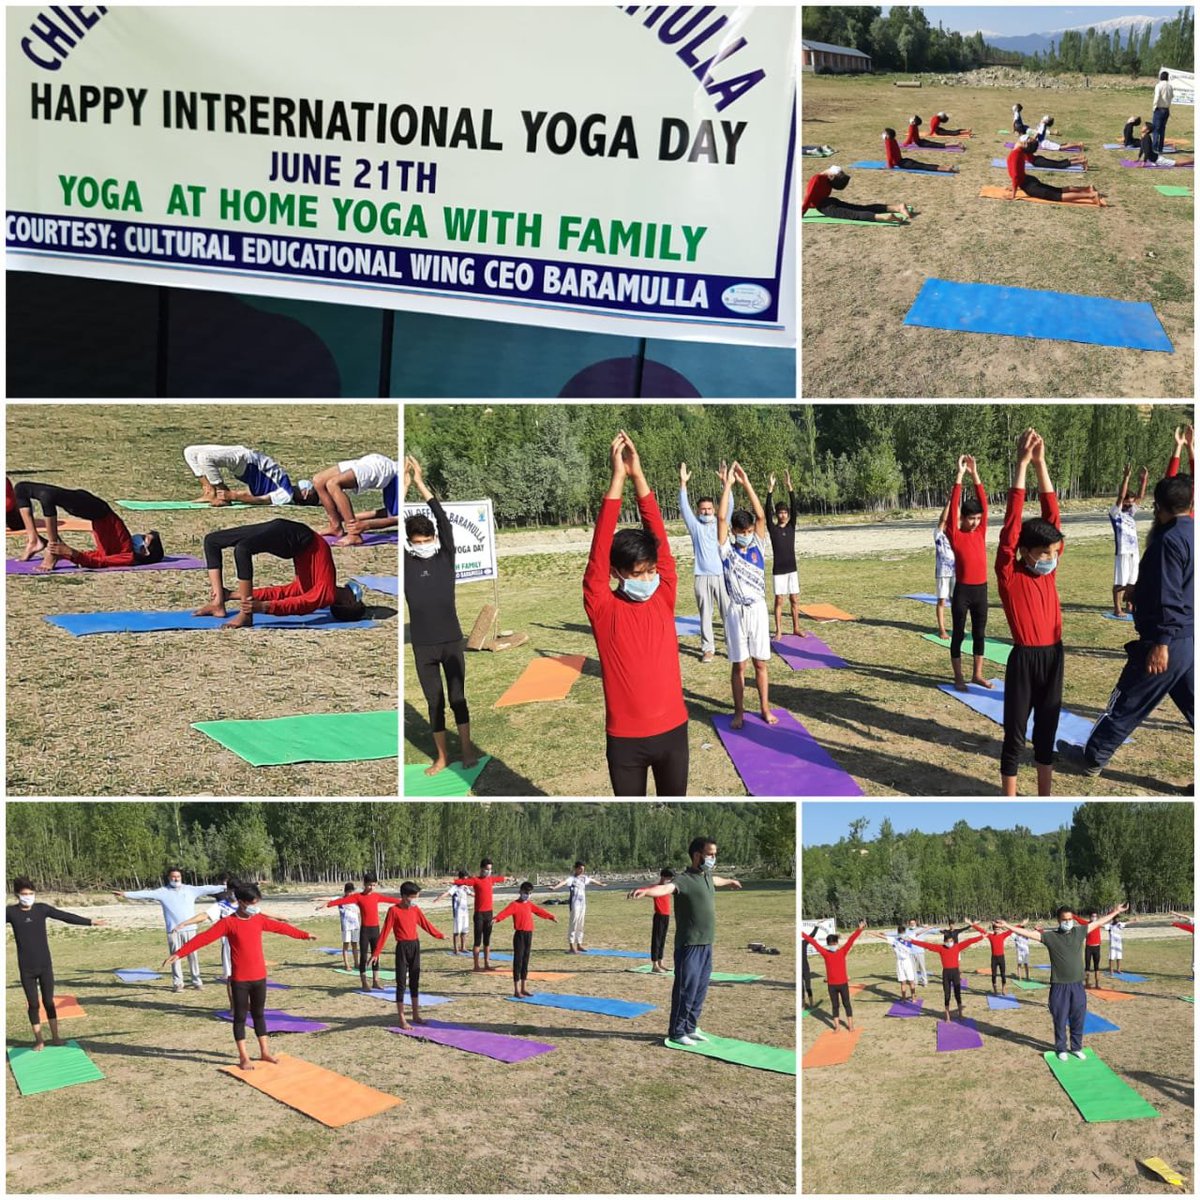 योगः कर्मसु कौशलम् 🧘‍♀️

On the occasion of #Internationalyogaday2020, the message of #HumFitTohIndiaFit💪 reverberated across the #AspirationalDistrict Baramulla, as citizens took out time for practicing yoga 🧘‍♂️